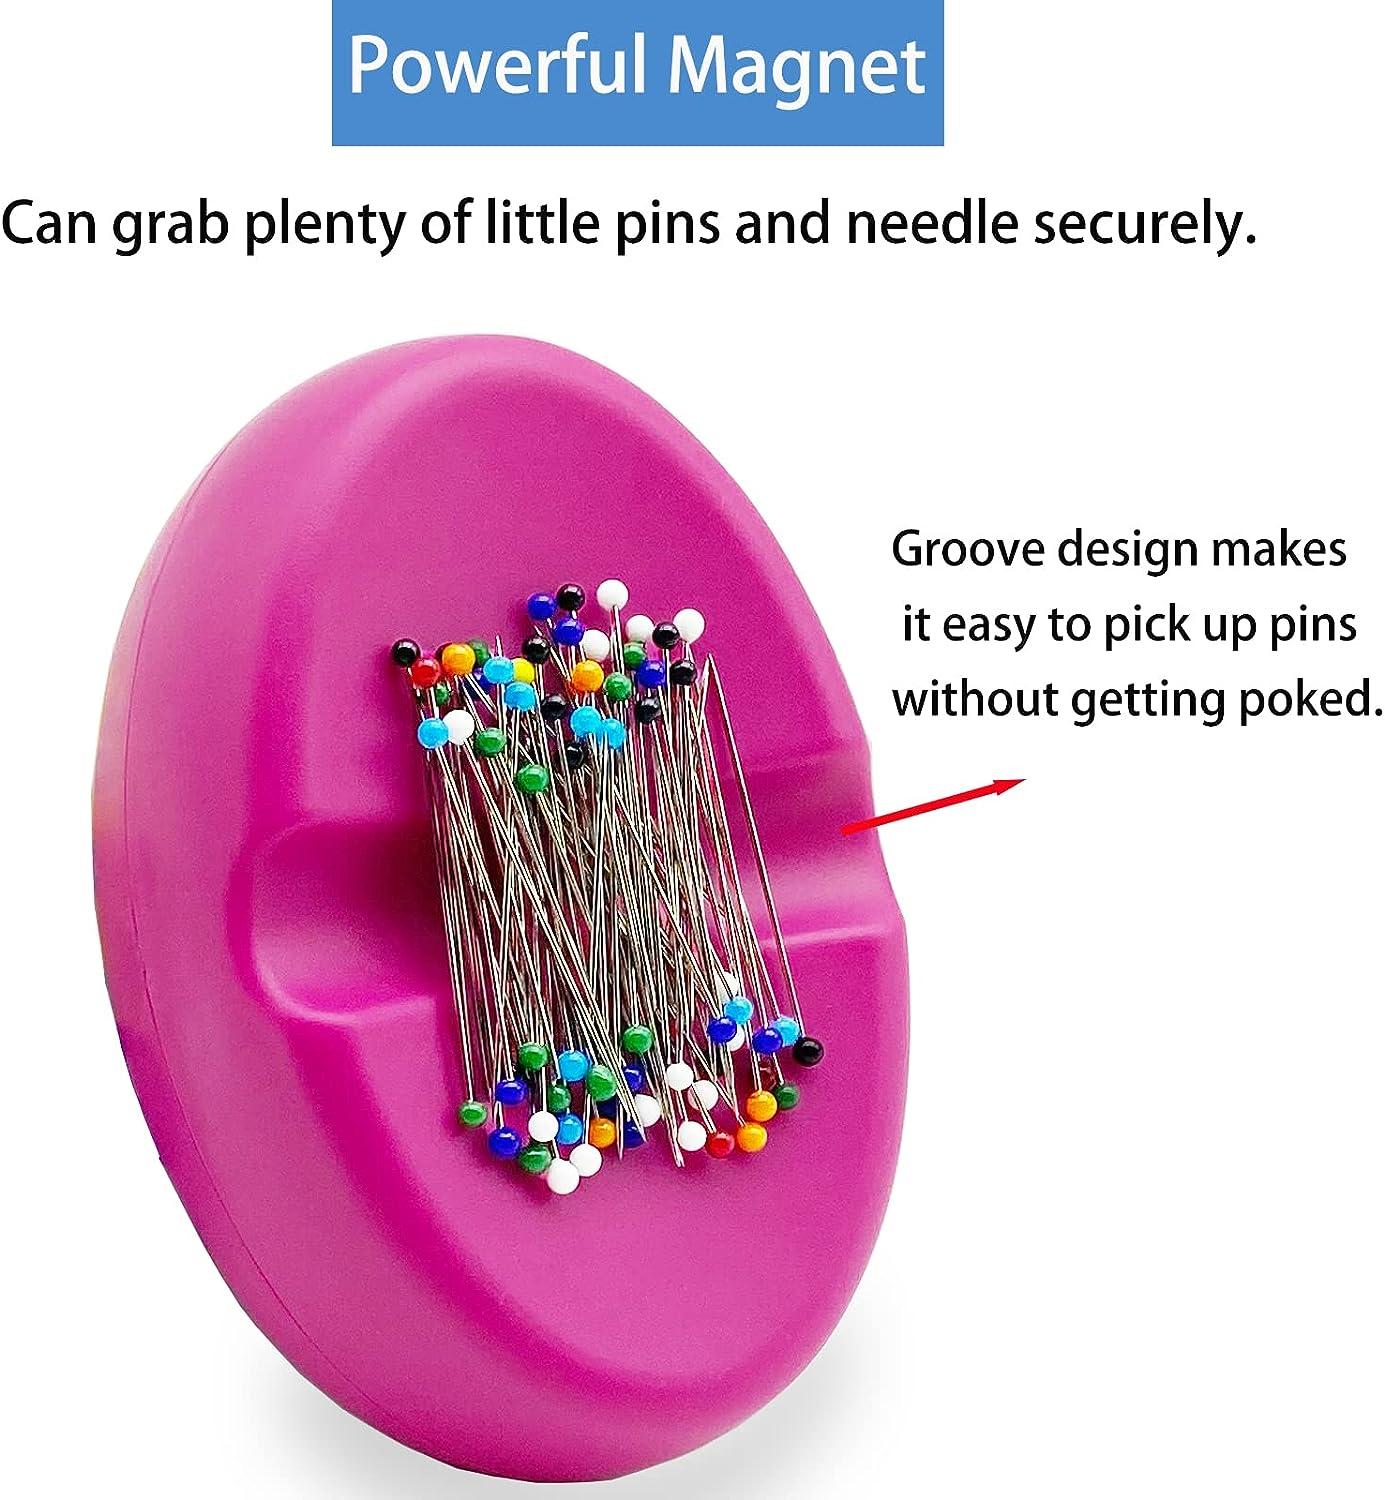 PinPal Magnetic Pin Holder - Catch, Carry, Organize, Store Your Pins &  Sewing Needles - Grab & Sew Pin Magnet For Sewing Pins - Magnetic Pin Dish  